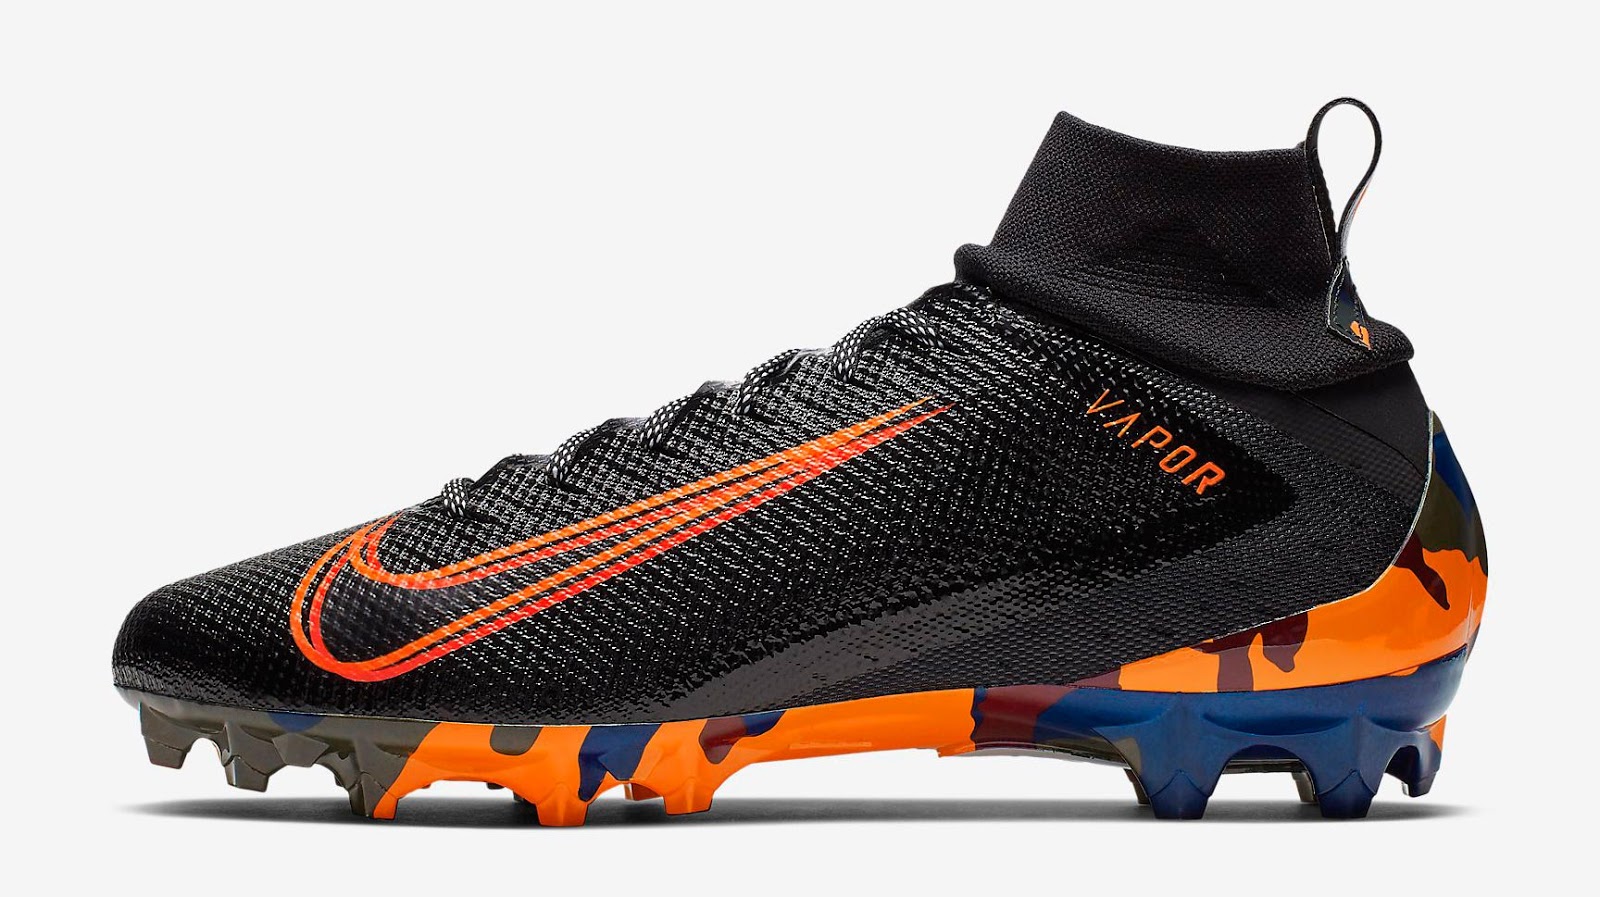 Preview Of Next-Gen 2019 Nike Mercurial Style - 2019 Nike Vapor Untouchable  3 American Football Shoes Released - Footy Headlines